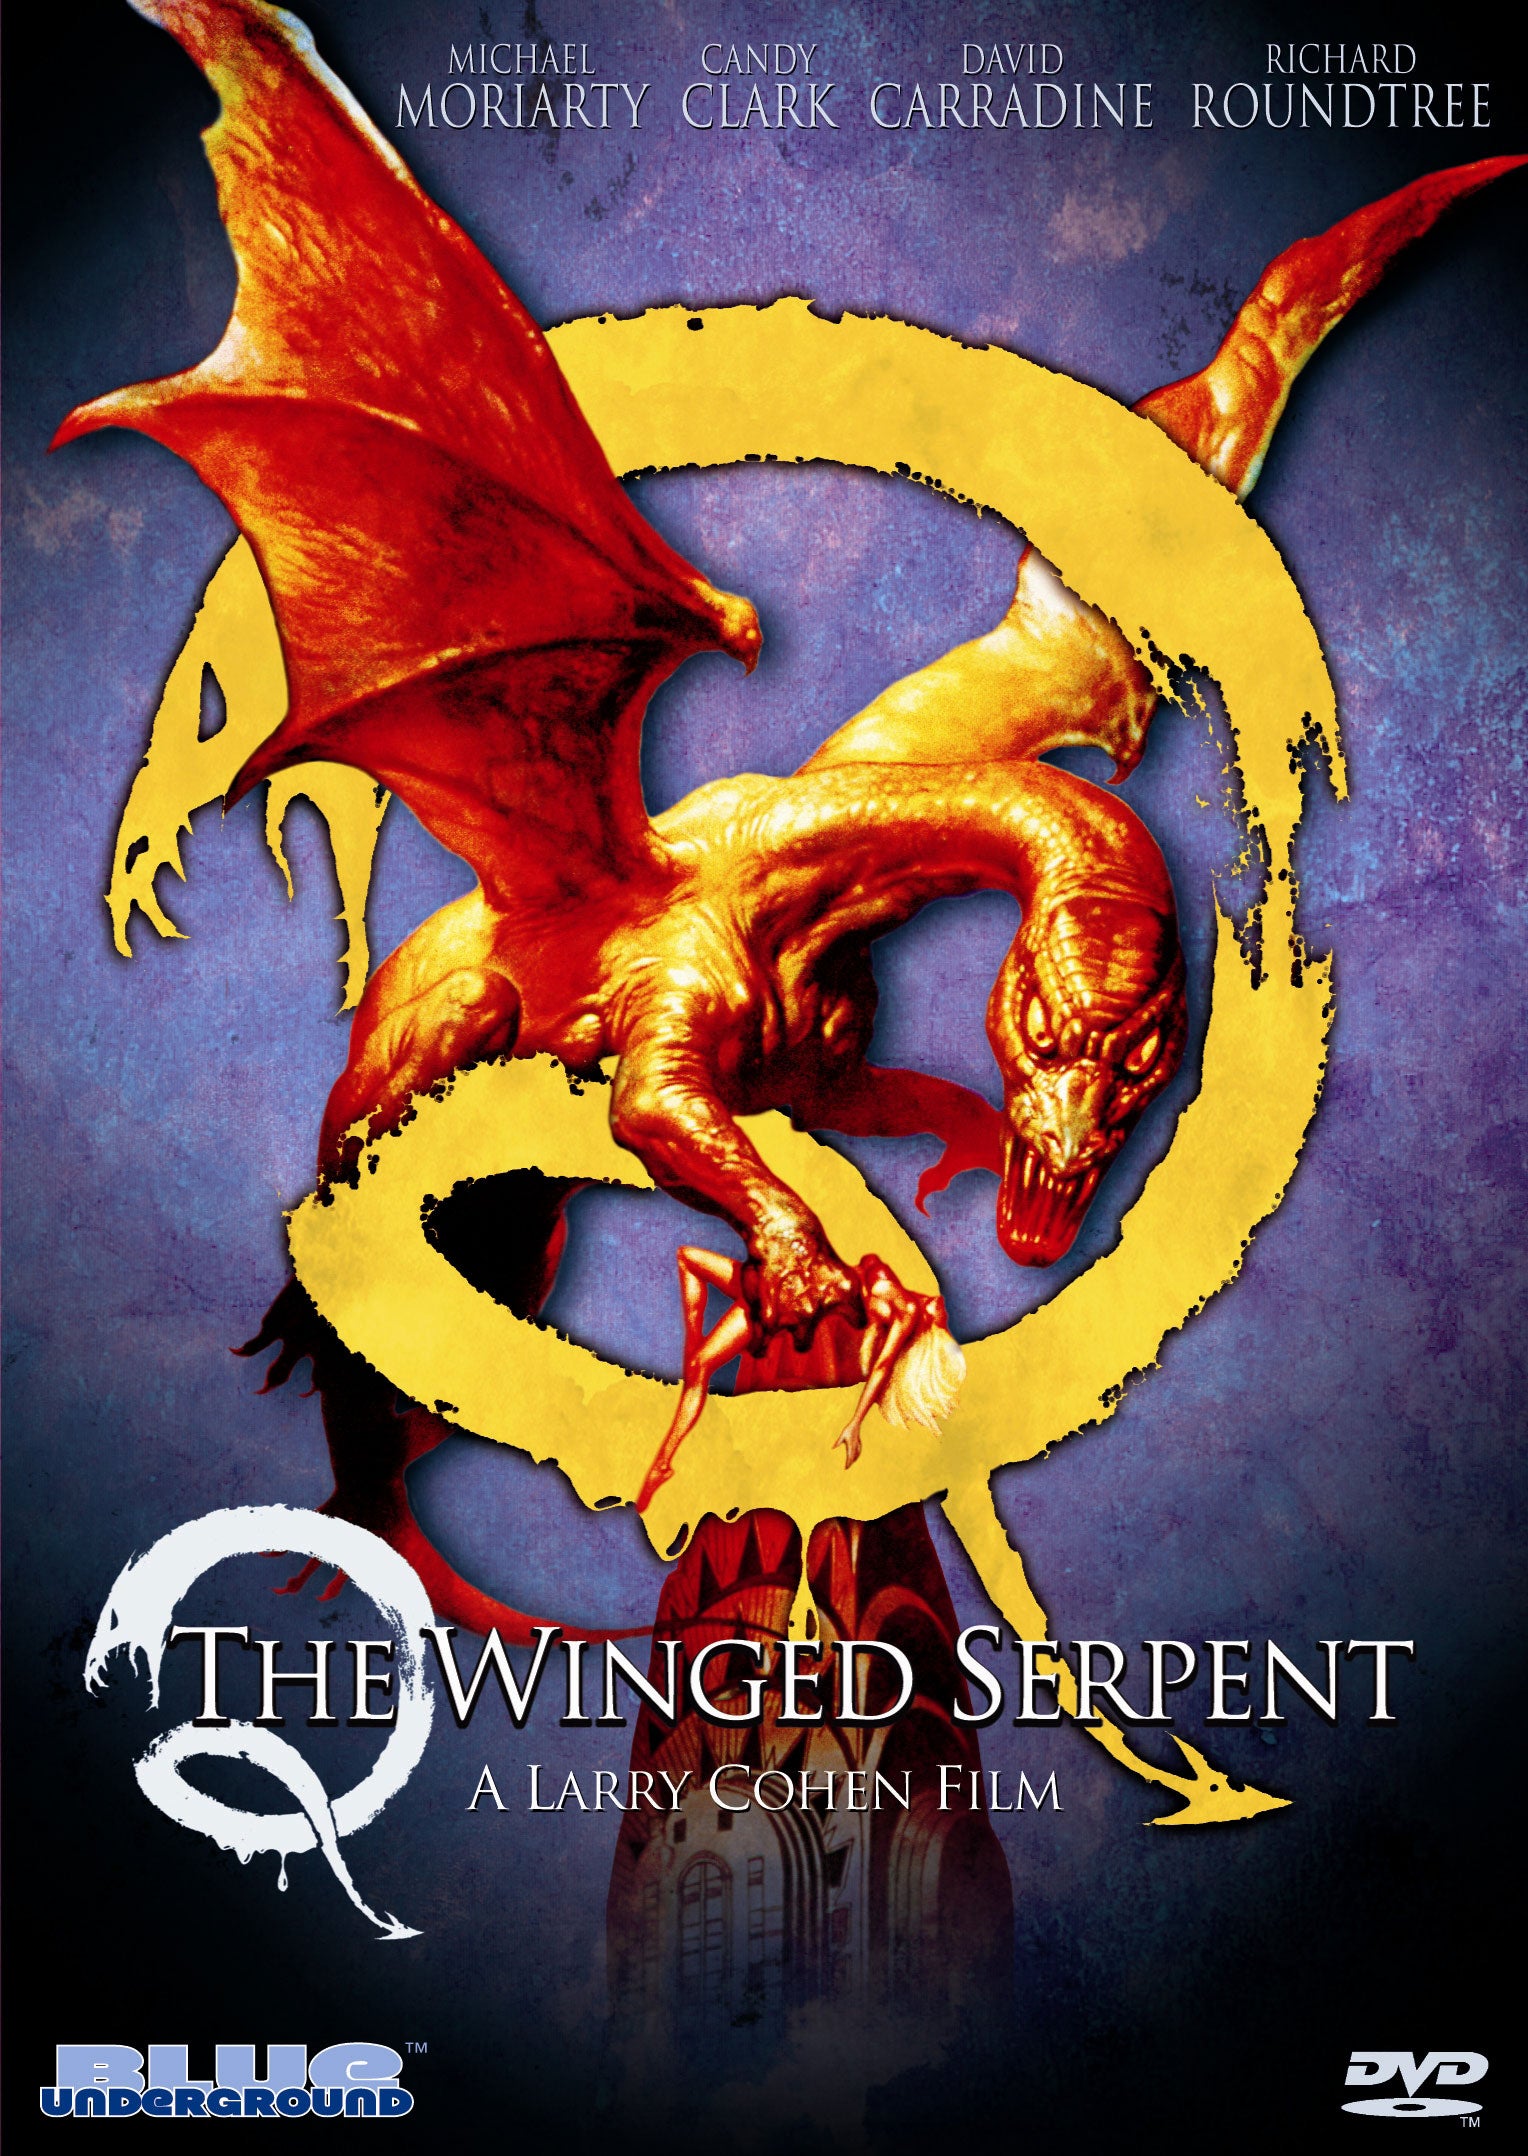 Q: THE WINGED SERPENT DVD